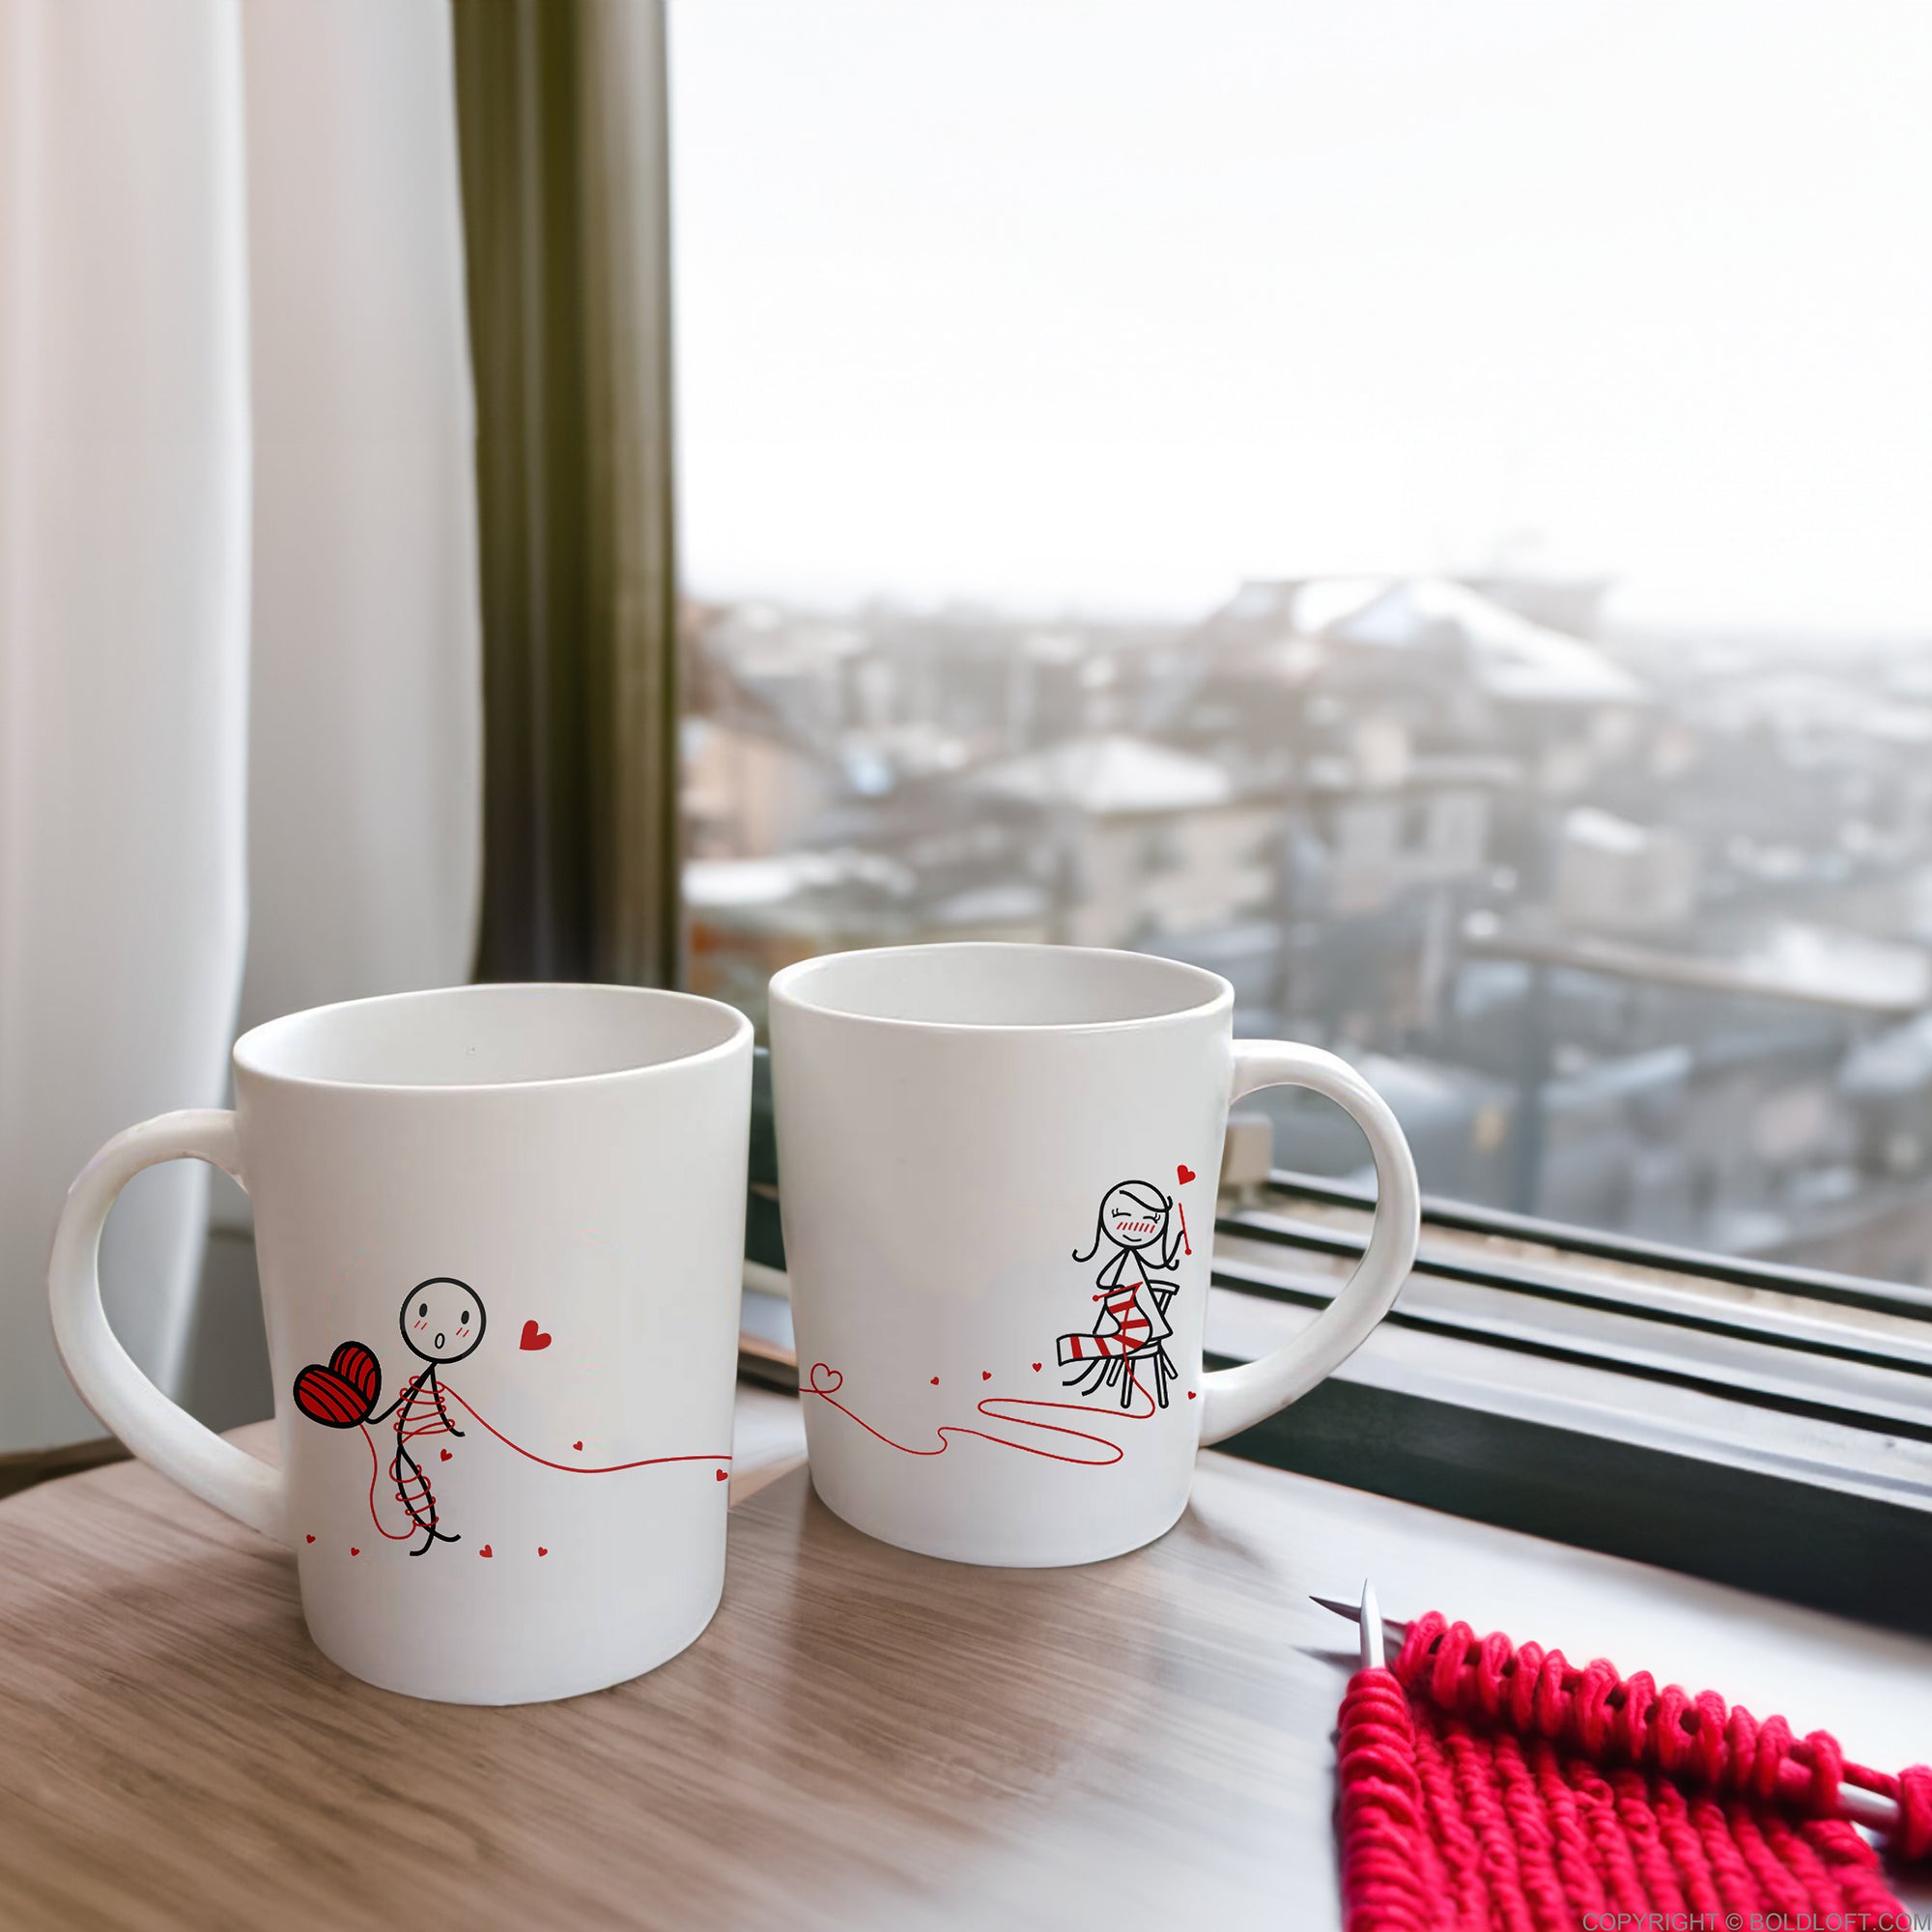 BoldLoft Love Ties Us Together Couple Mugs, featuring a girl knitting her love to a boy